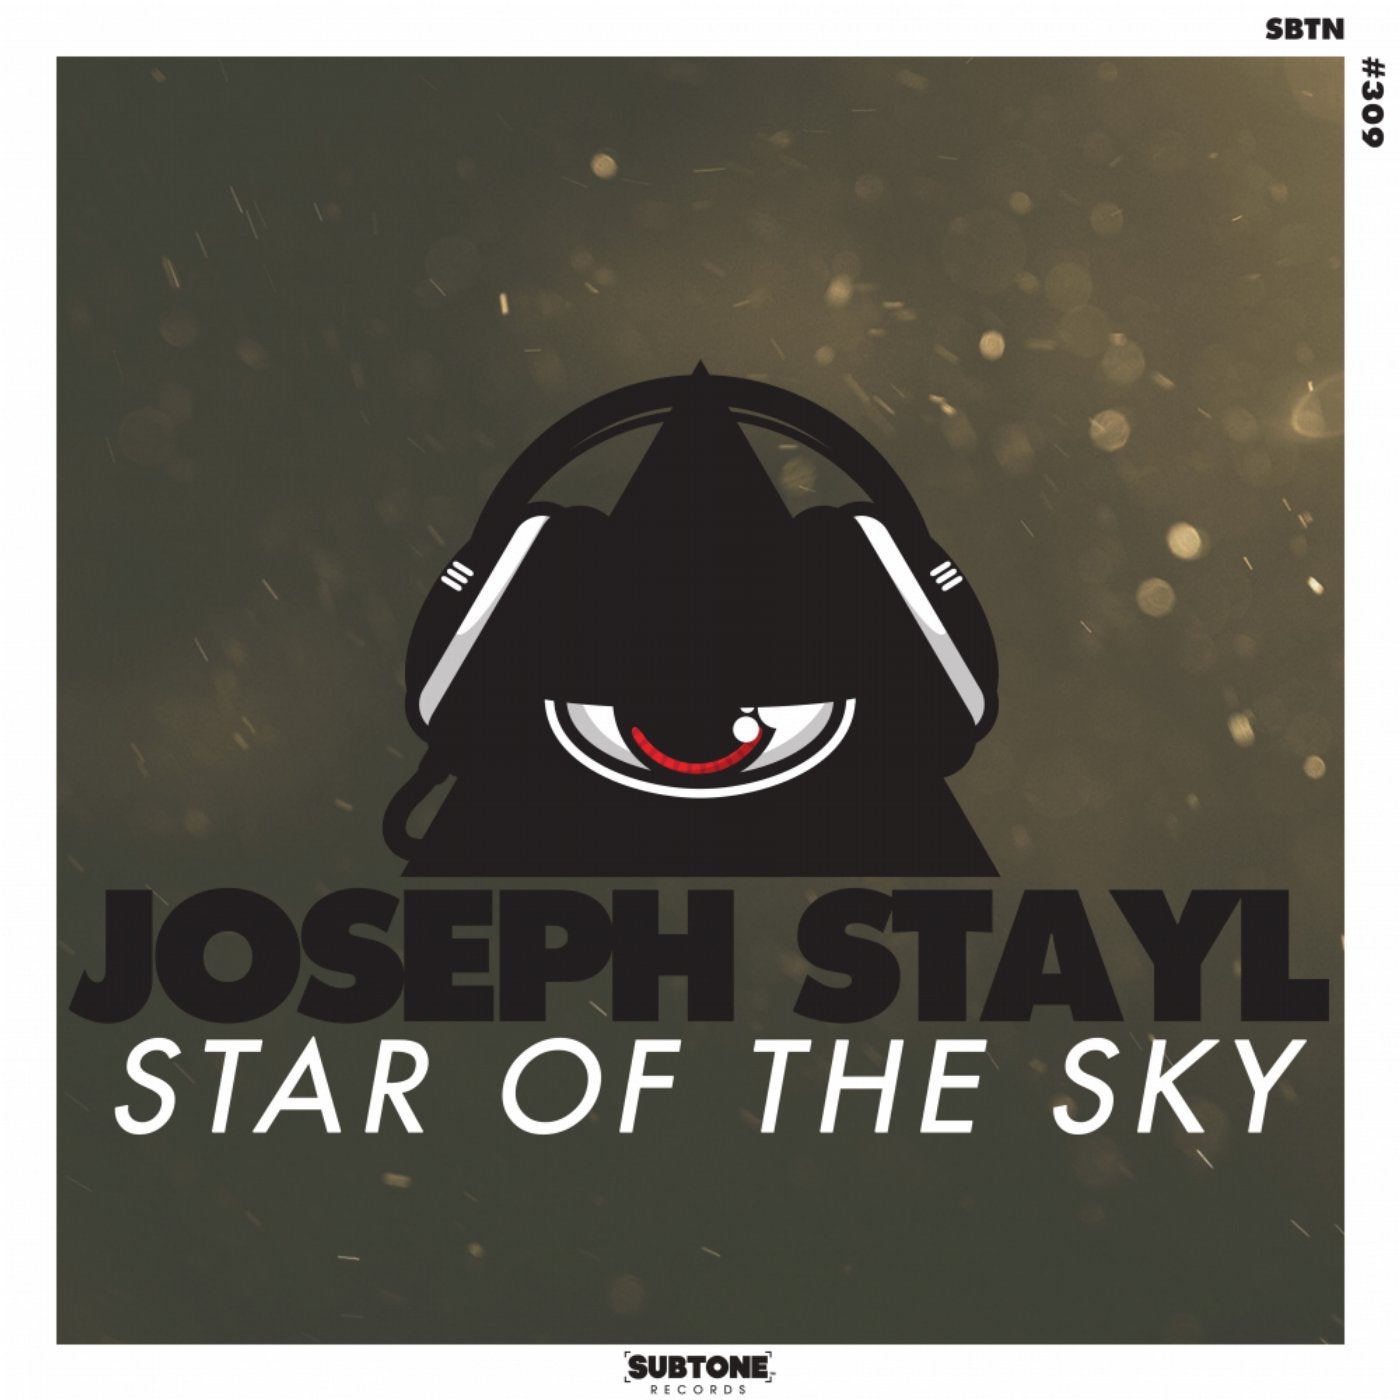 Star of The Sky